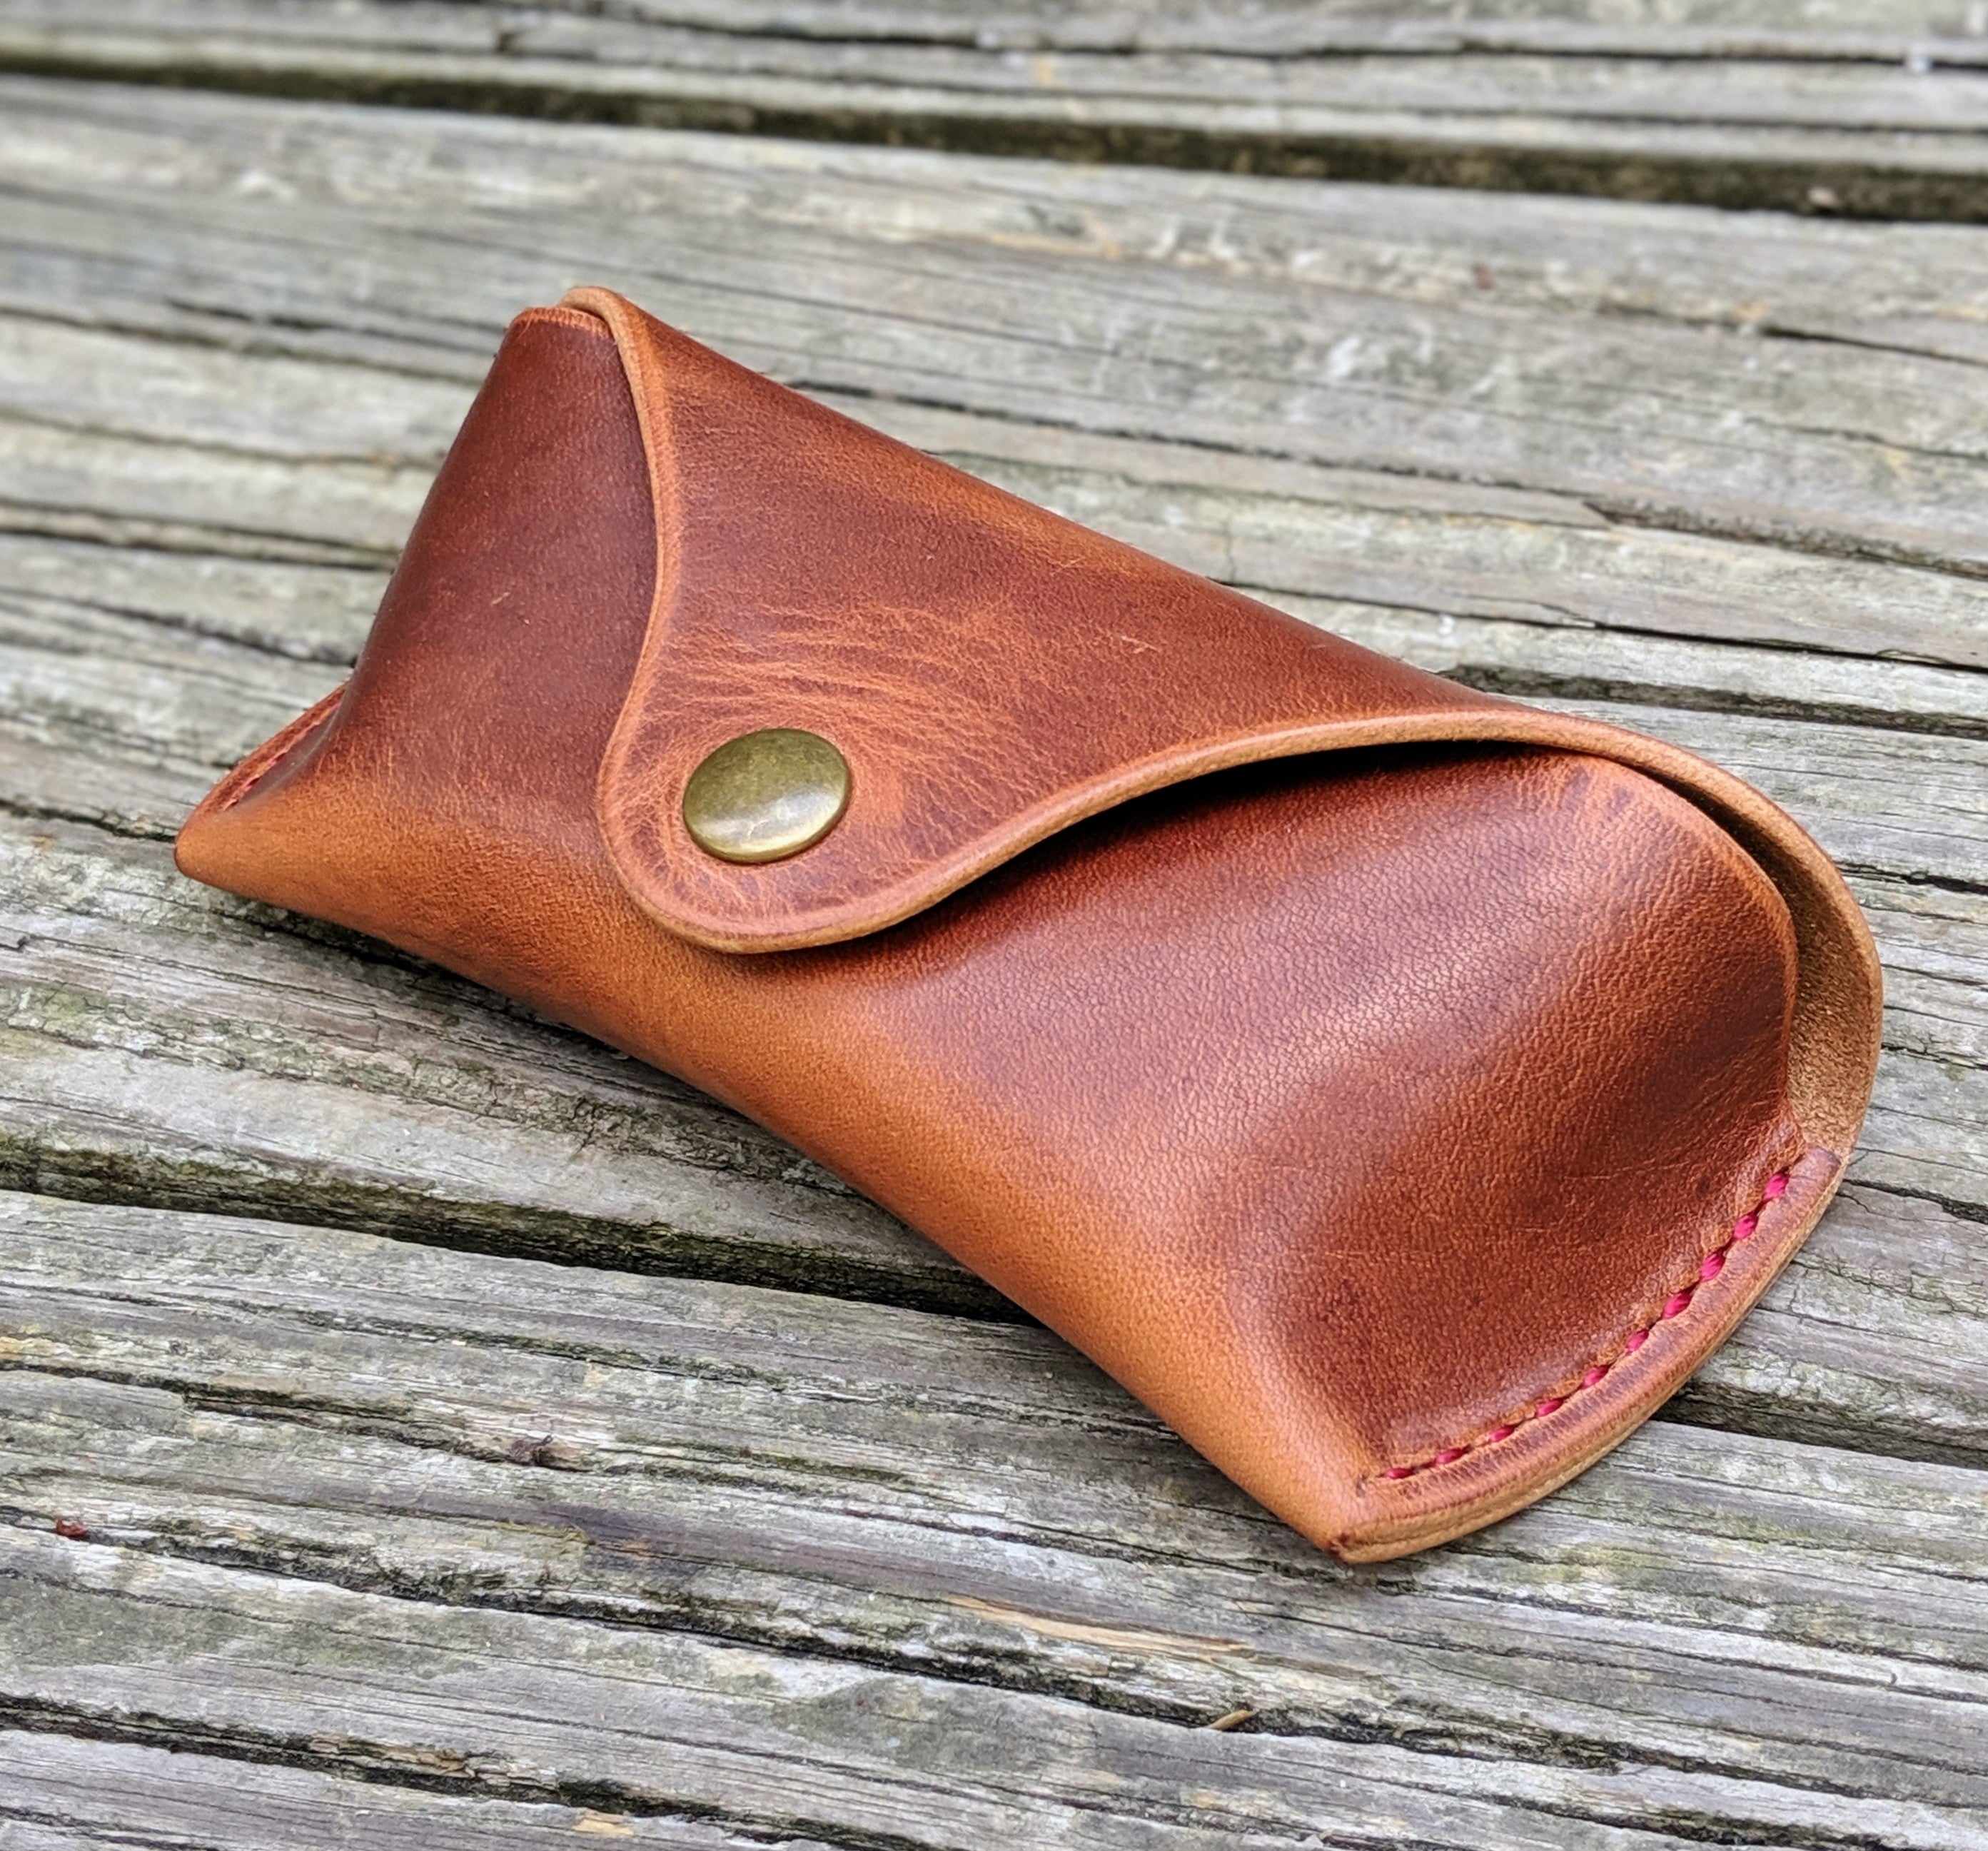 Sunglasses case, a specs case made from leather